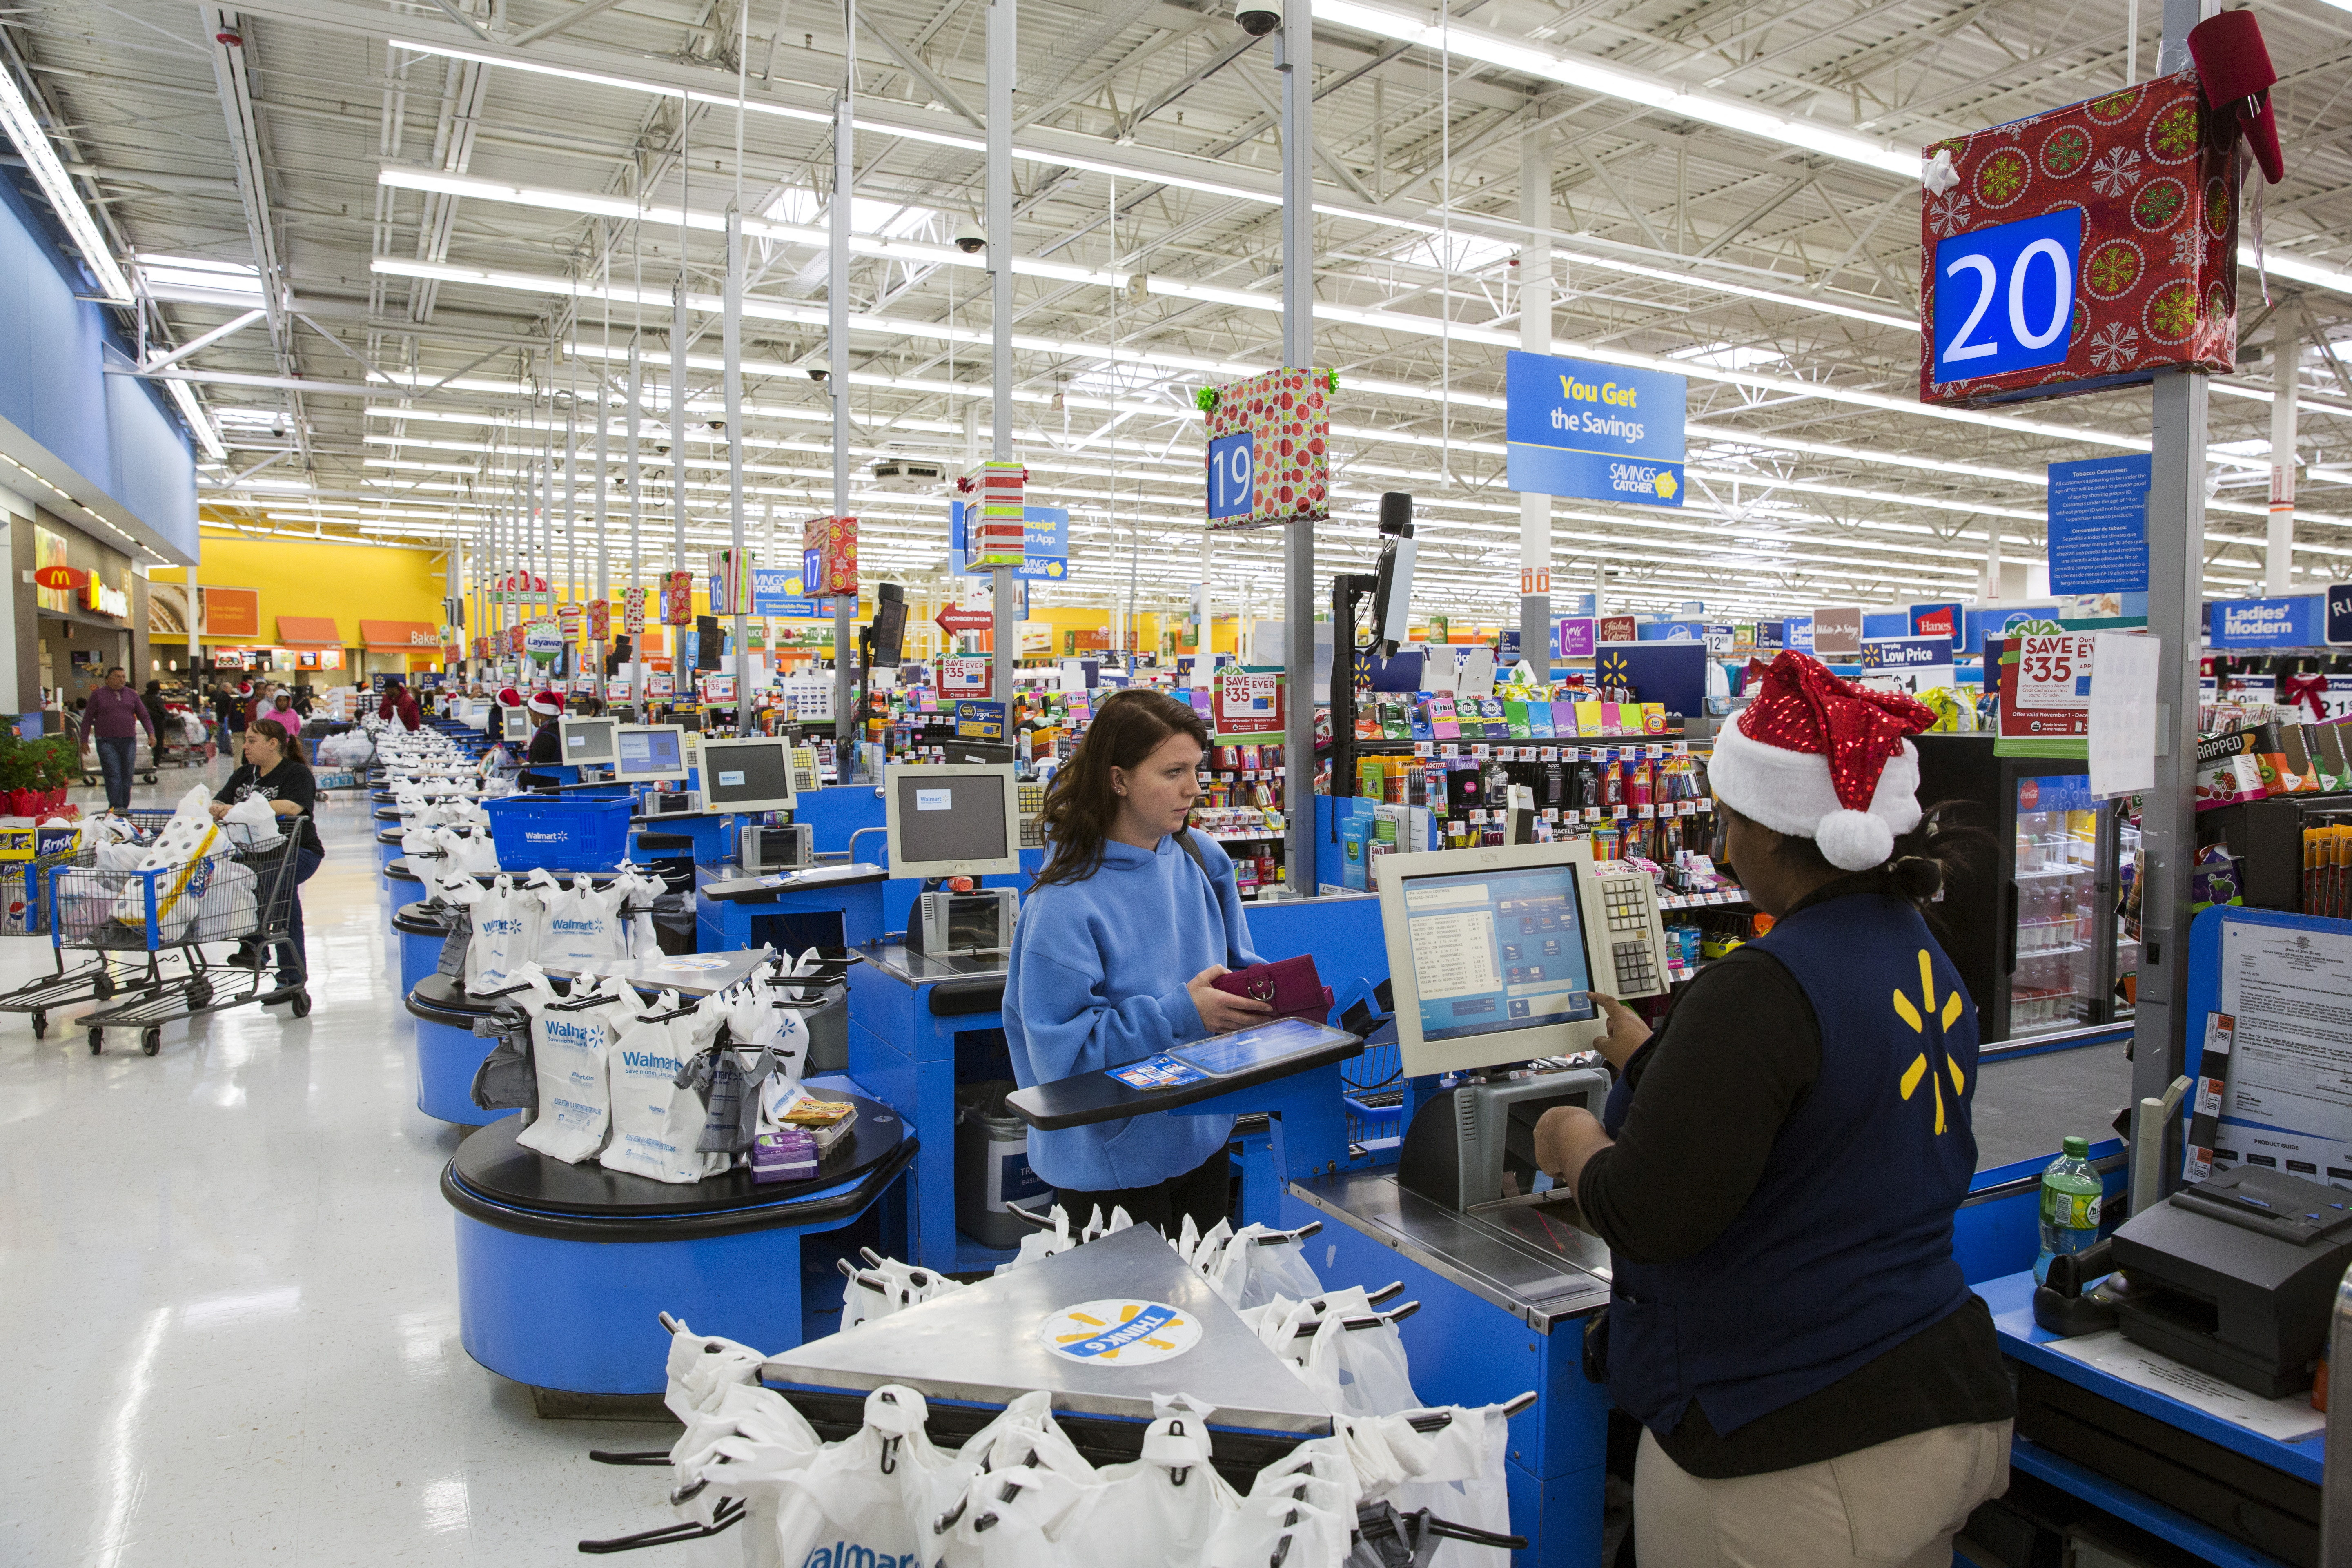 Affirm offers 'buy now, pay later' loans at Walmart self-checkouts